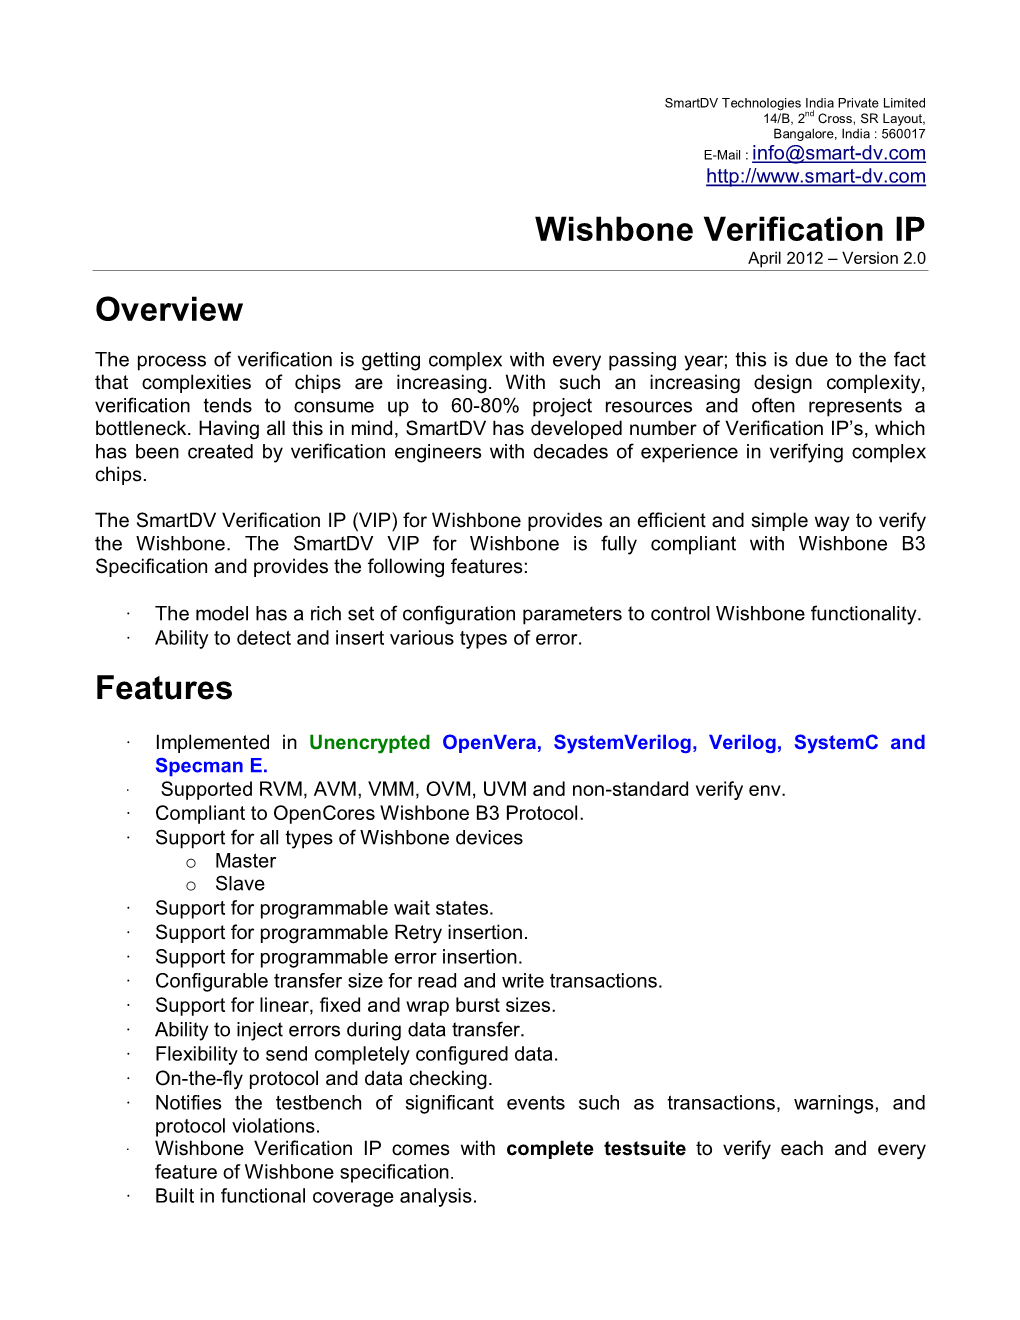 Wishbone Verification IP Overview Features